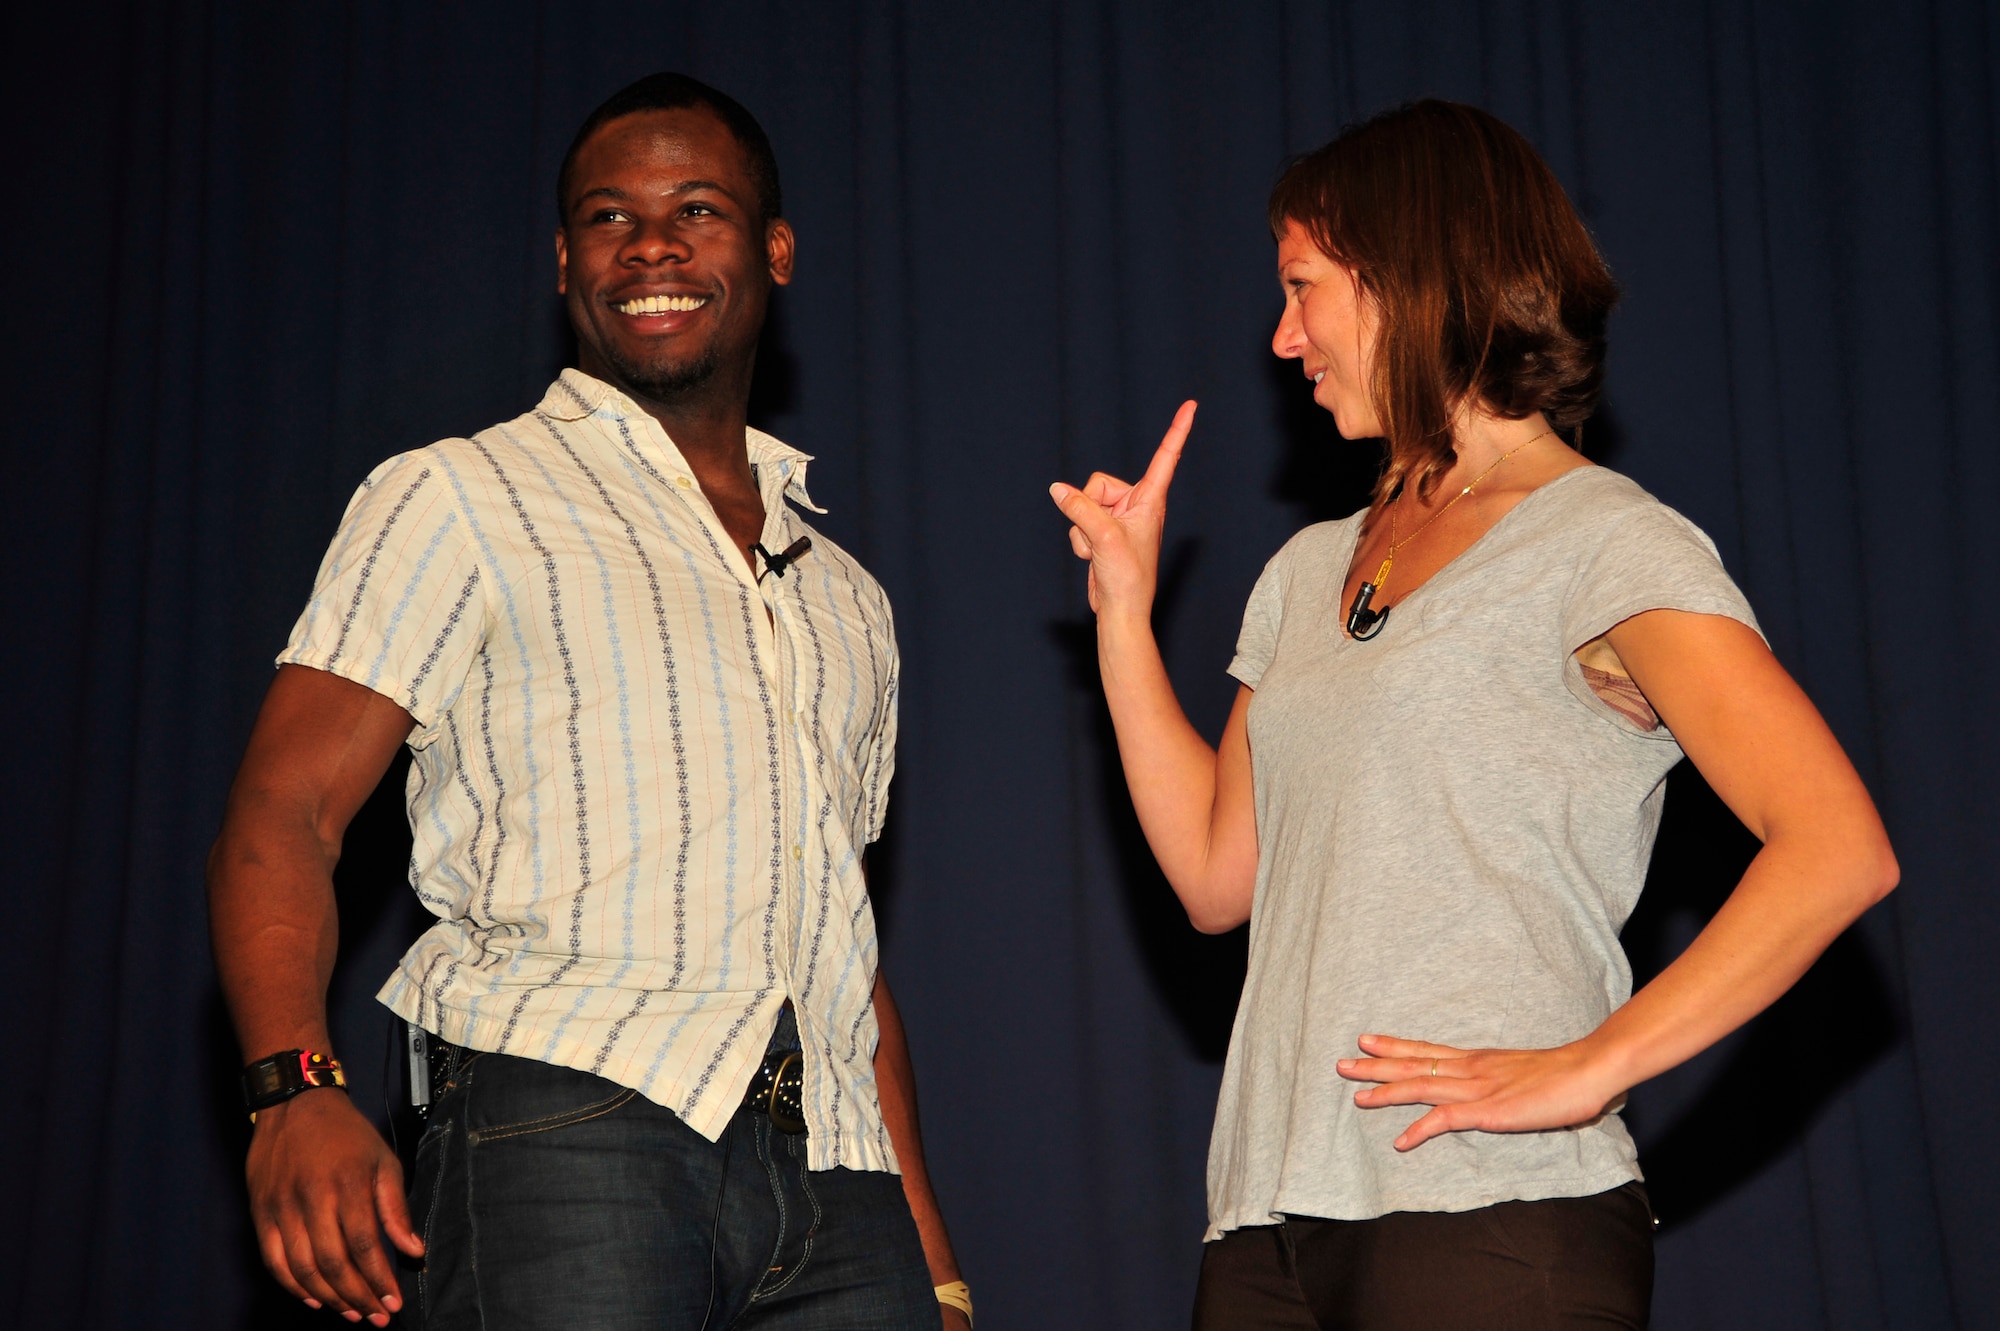 Performers Kyle Terry, left, and Amber Kelly, right, portray a dating scene during the "Sex Signals" presentation at the Hurlburt Field Commando Auditorium March 29.  “Sex Signals” is an improvised, two-person presentation geared to educate Airmen about the stereotypes and misconceptions surrounding sexual assault. (U.S. Air Force photo by Senior Airman Matthew Loken)